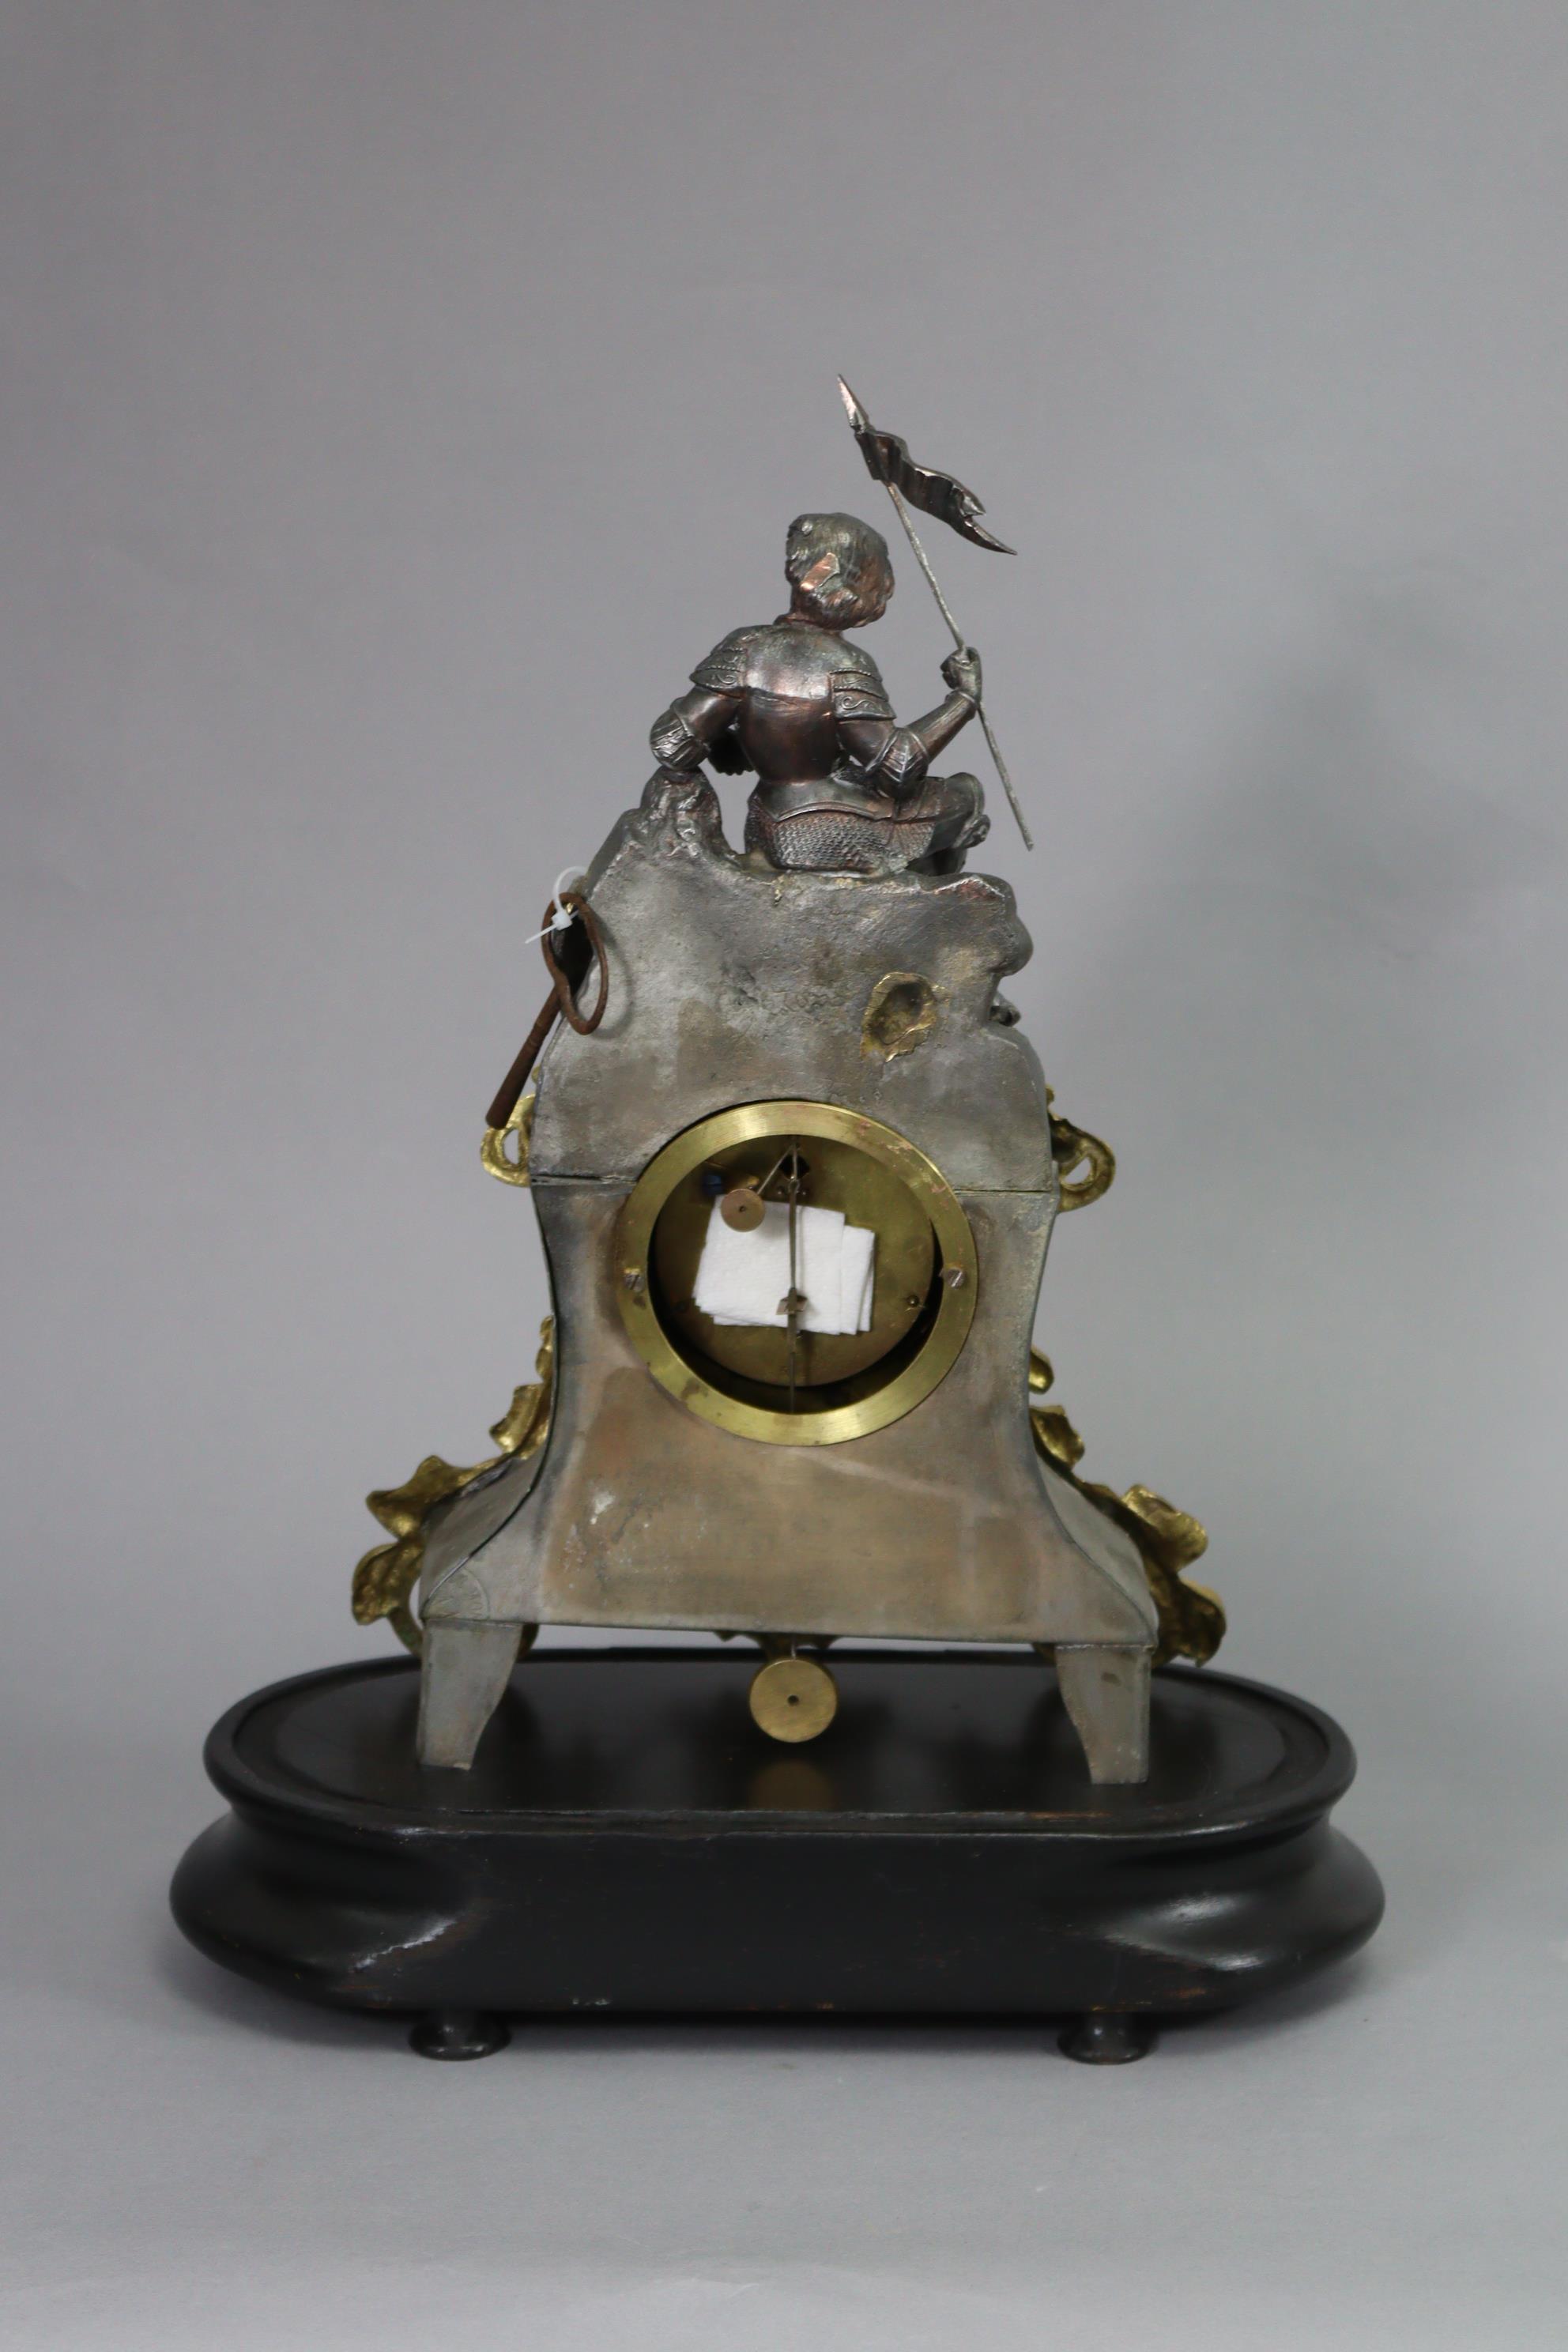 A 19th century French mantel clock in speltre figural case with pierced gilt-metal rococo style - Image 3 of 3